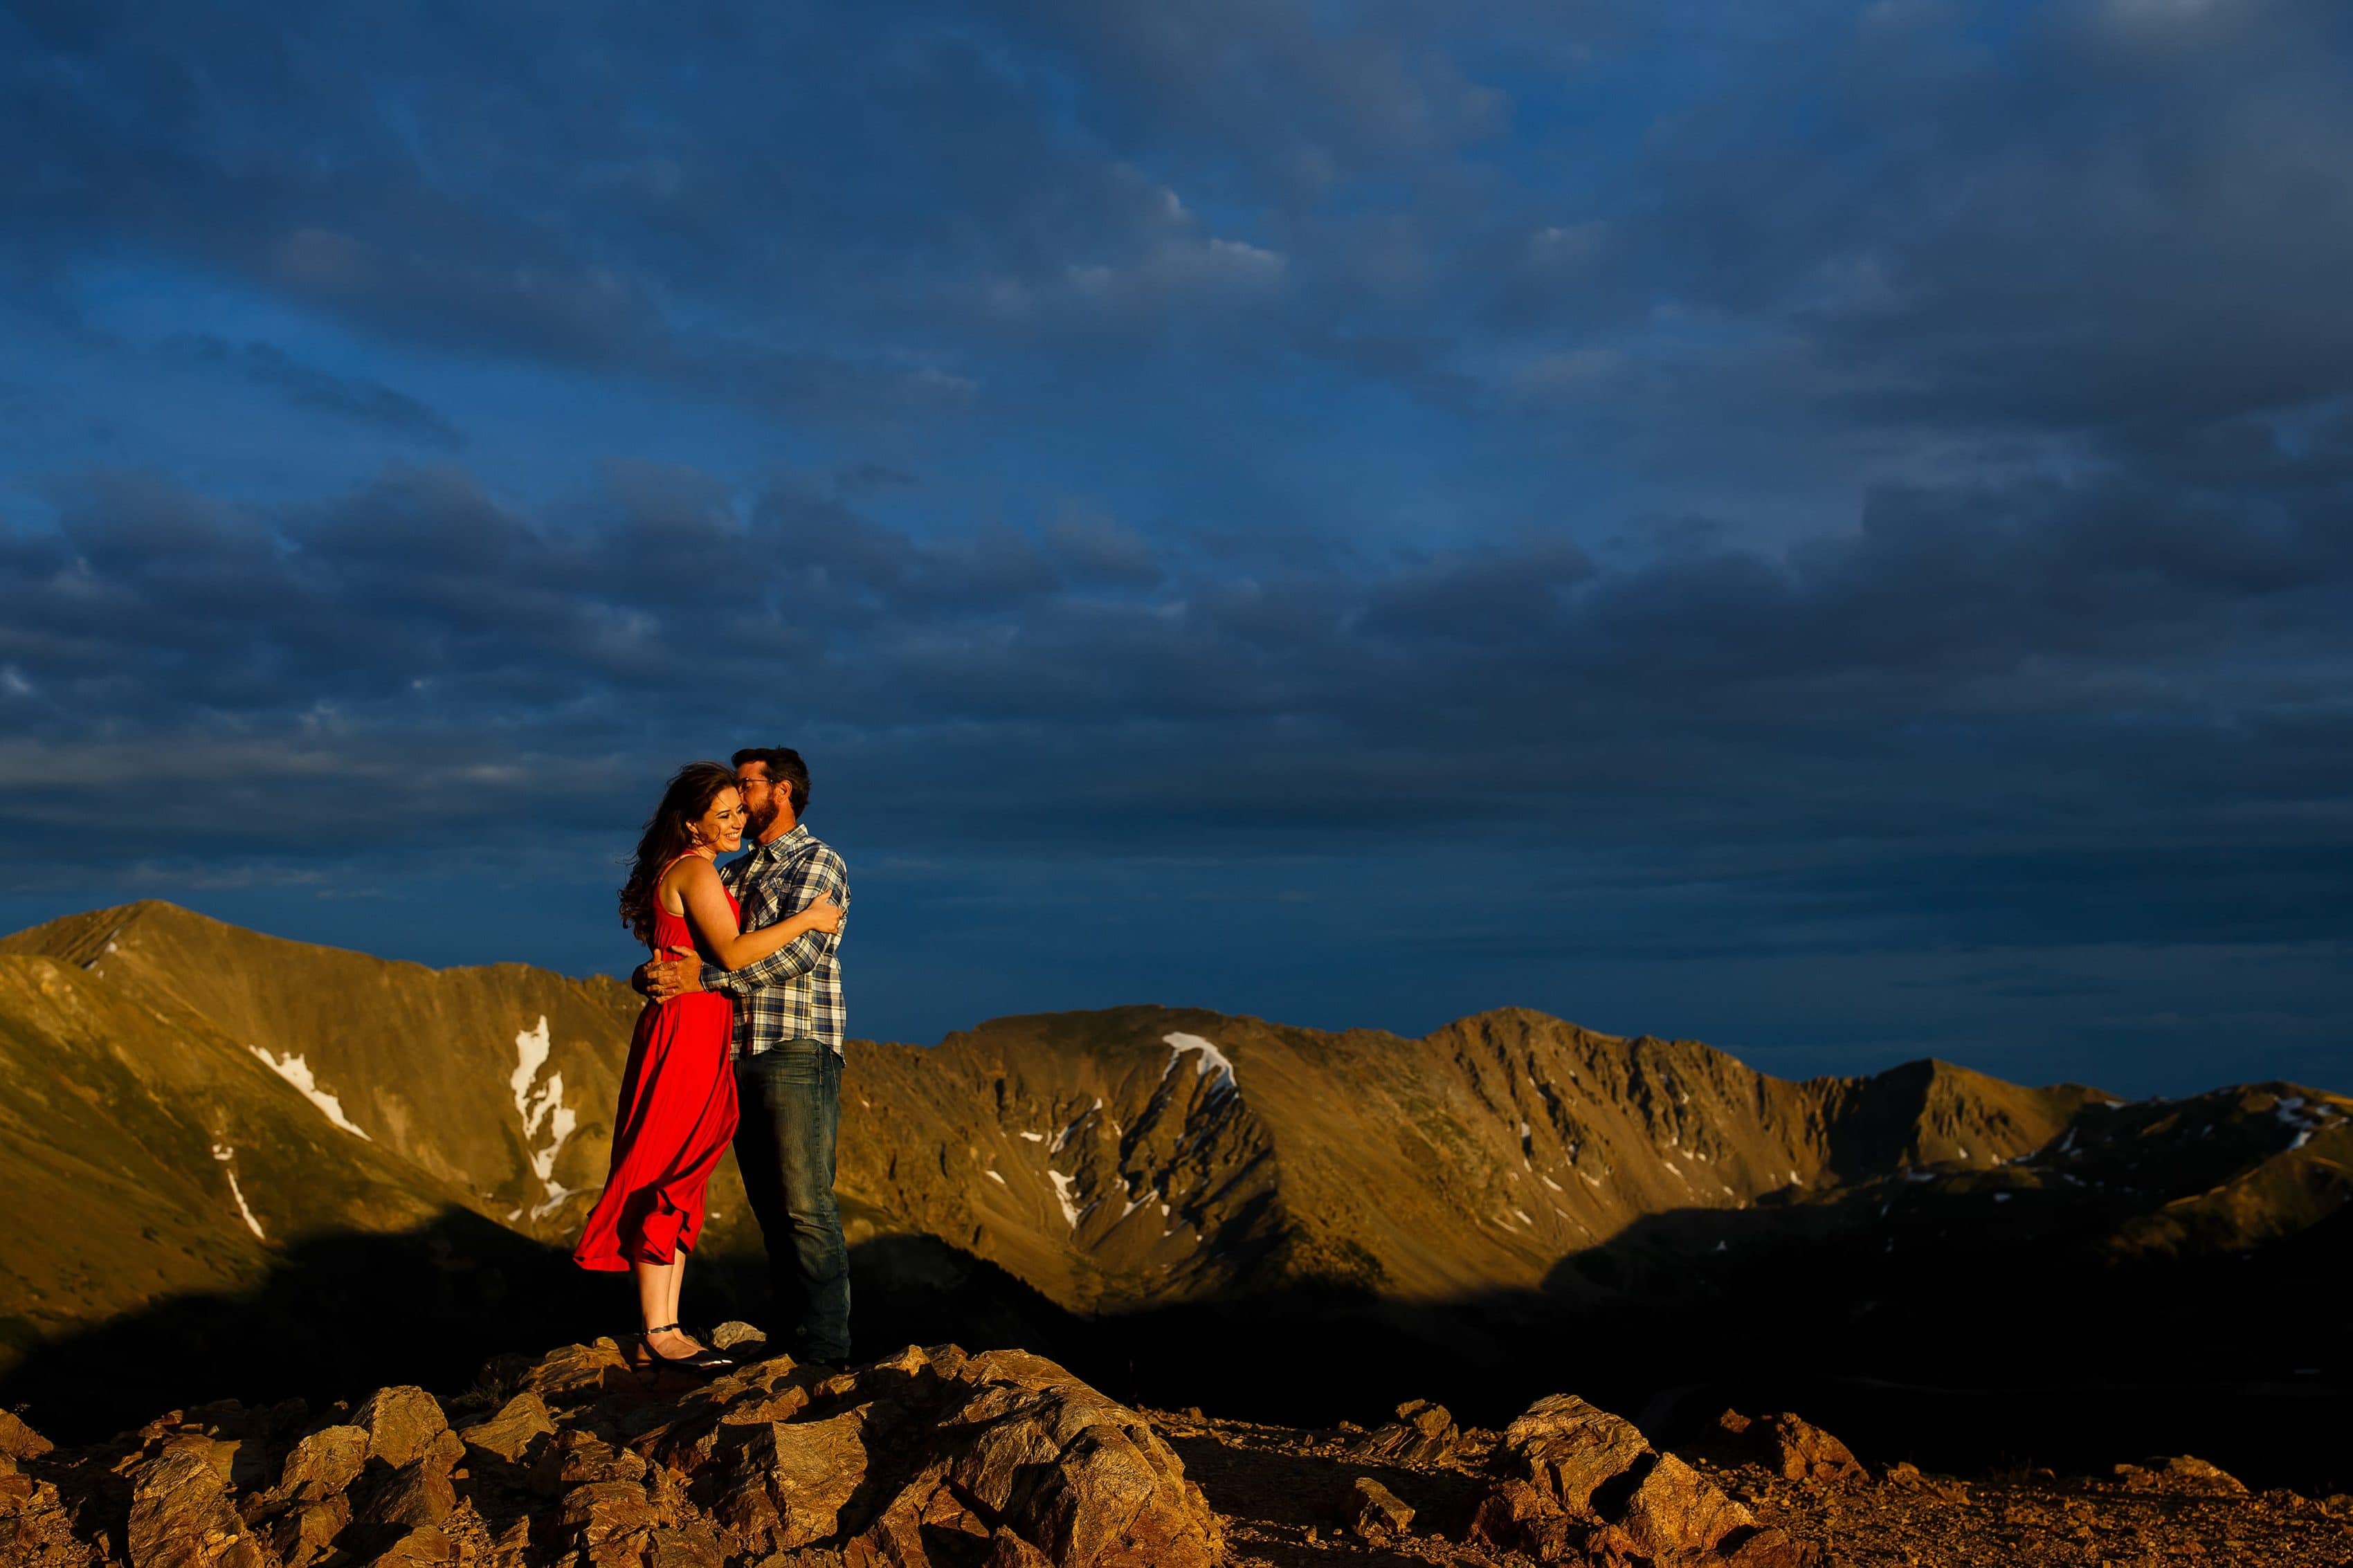 Daniel kisses Mallory as the two embrace on top of Loveland pass as the sun sets near Keystone Colorado